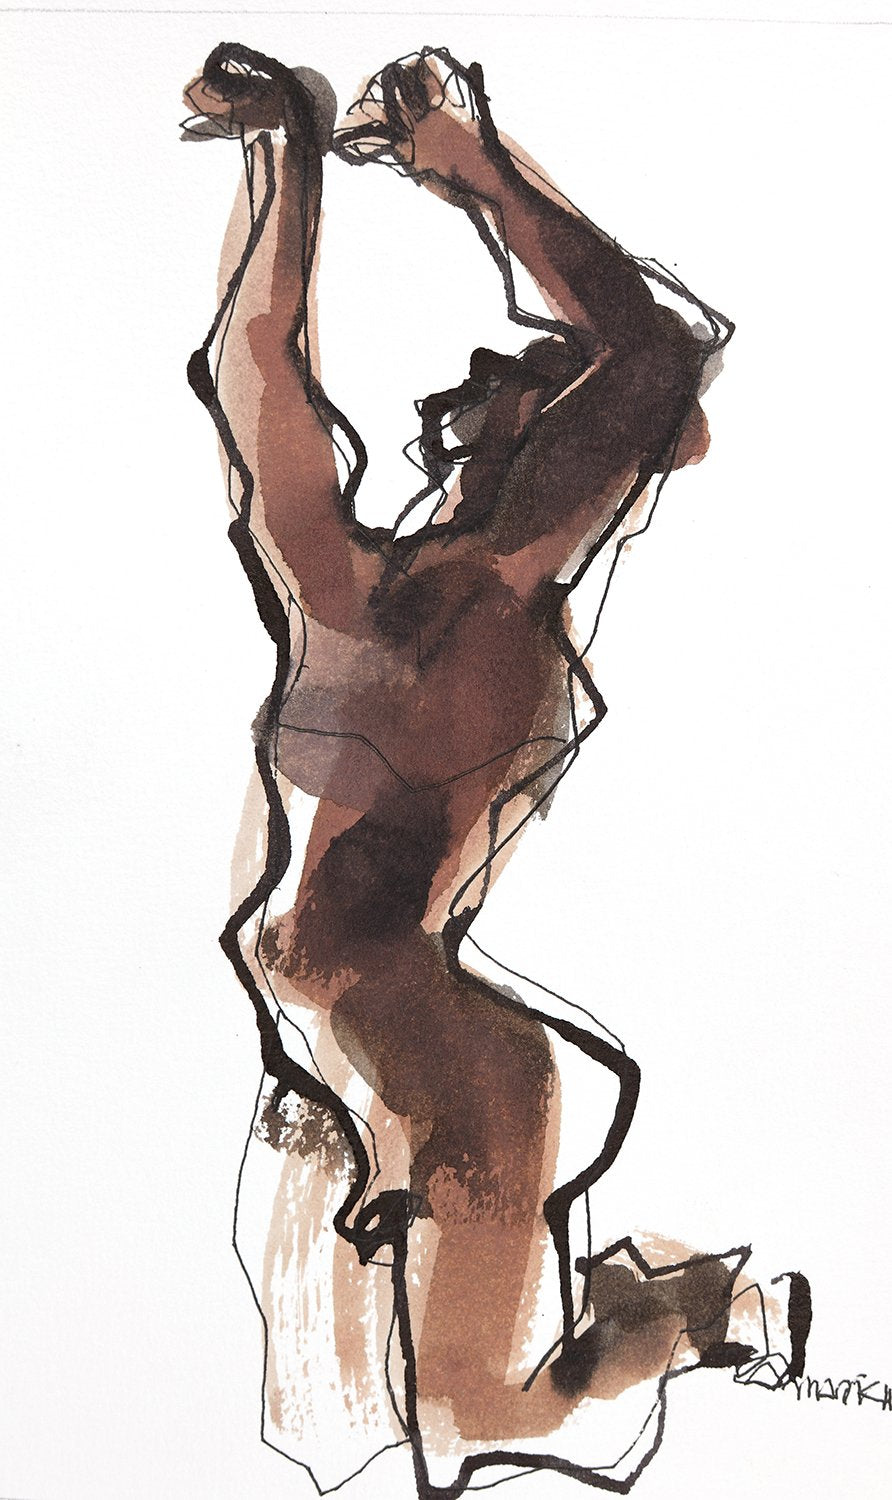 Nude 8|S. Mark Rathinaraj- Pen and Ink on Paper, , 8.5 x 5.5 inches